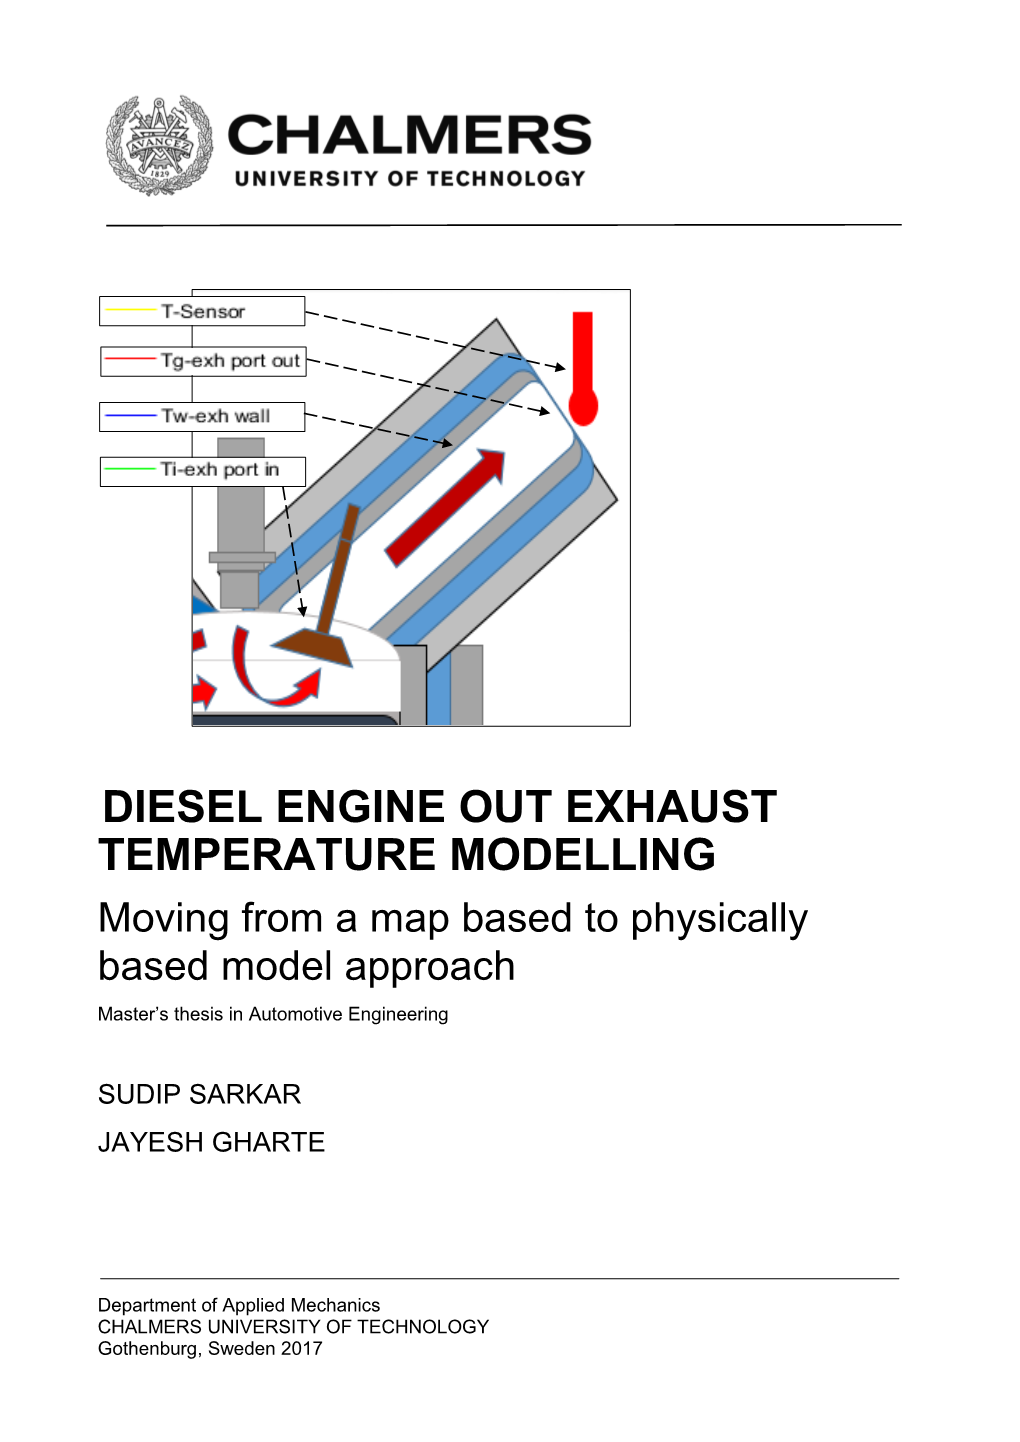 DIESEL ENGINE out EXHAUST TEMPERATURE MODELLING Moving from a Map Based to Physically Based Model Approach Master’S Thesis in Automotive Engineering